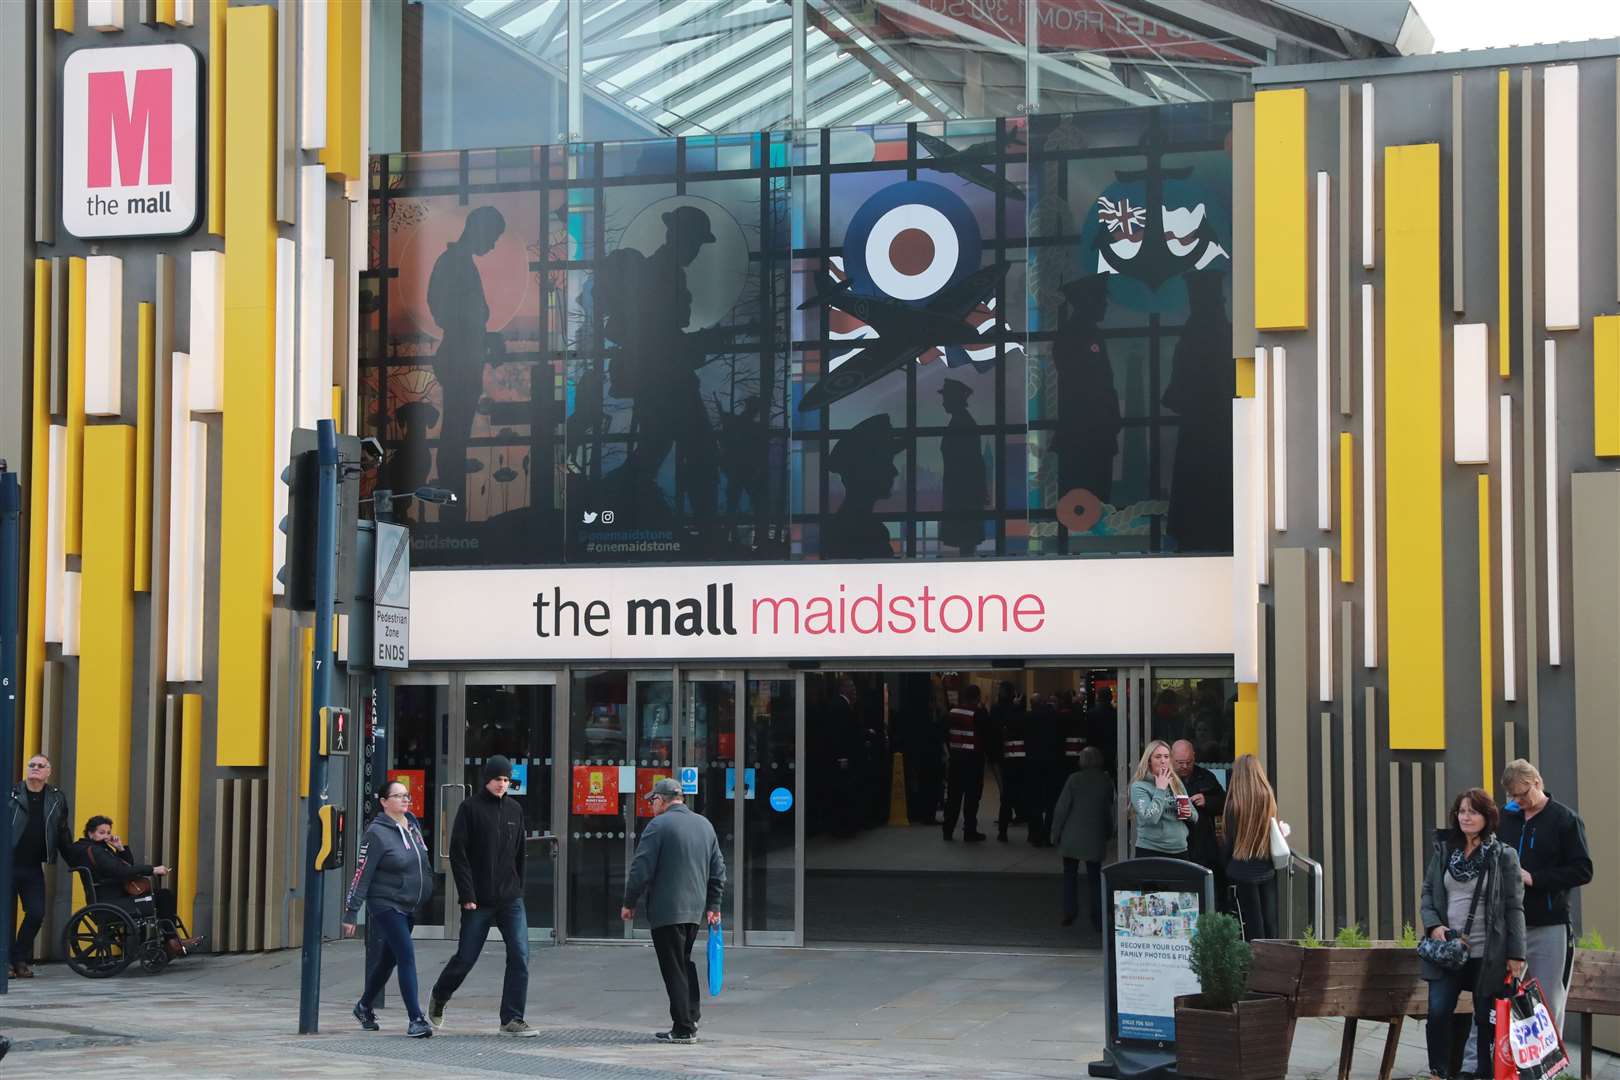 The Virgin Media store in The Mall in Maidstone is on the list of planned closures